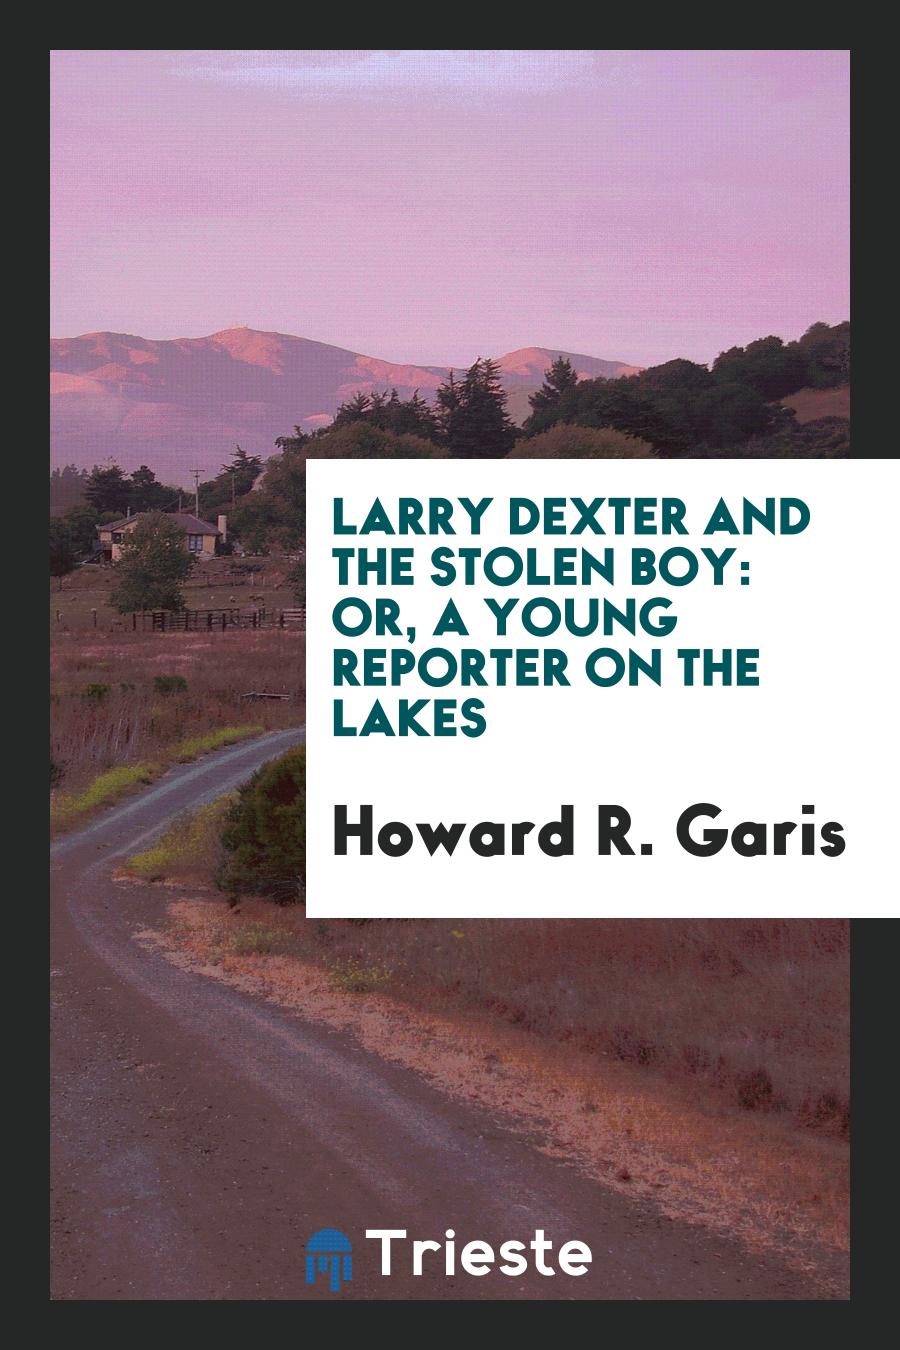 Larry Dexter and the Stolen Boy: Or, a Young Reporter on the Lakes